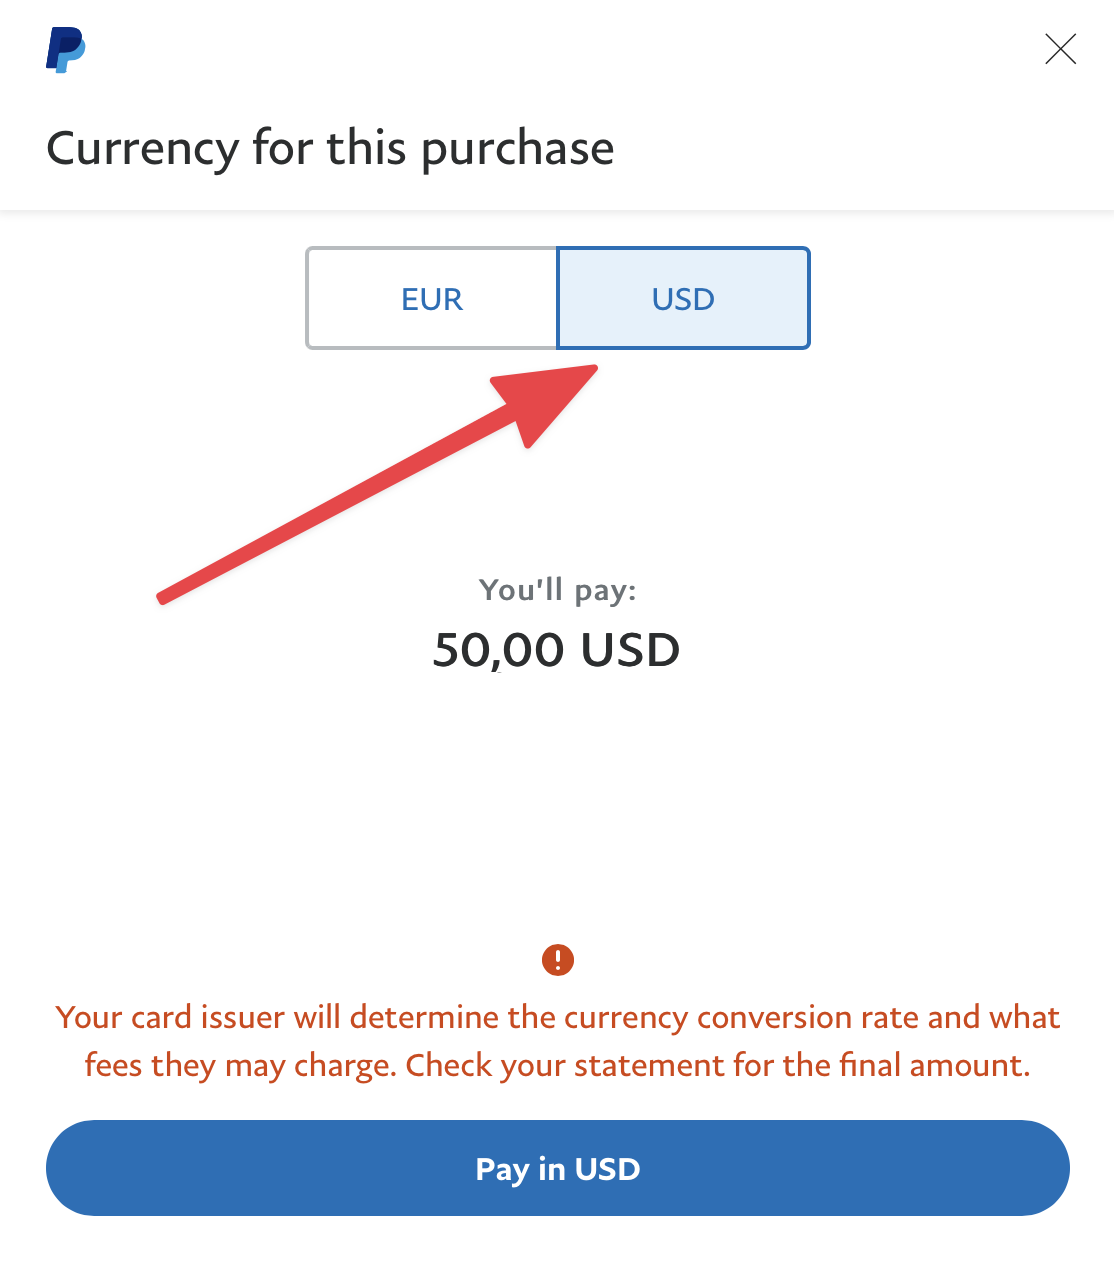 PayPal EUR to USD Exchange Rates - Compare & Save